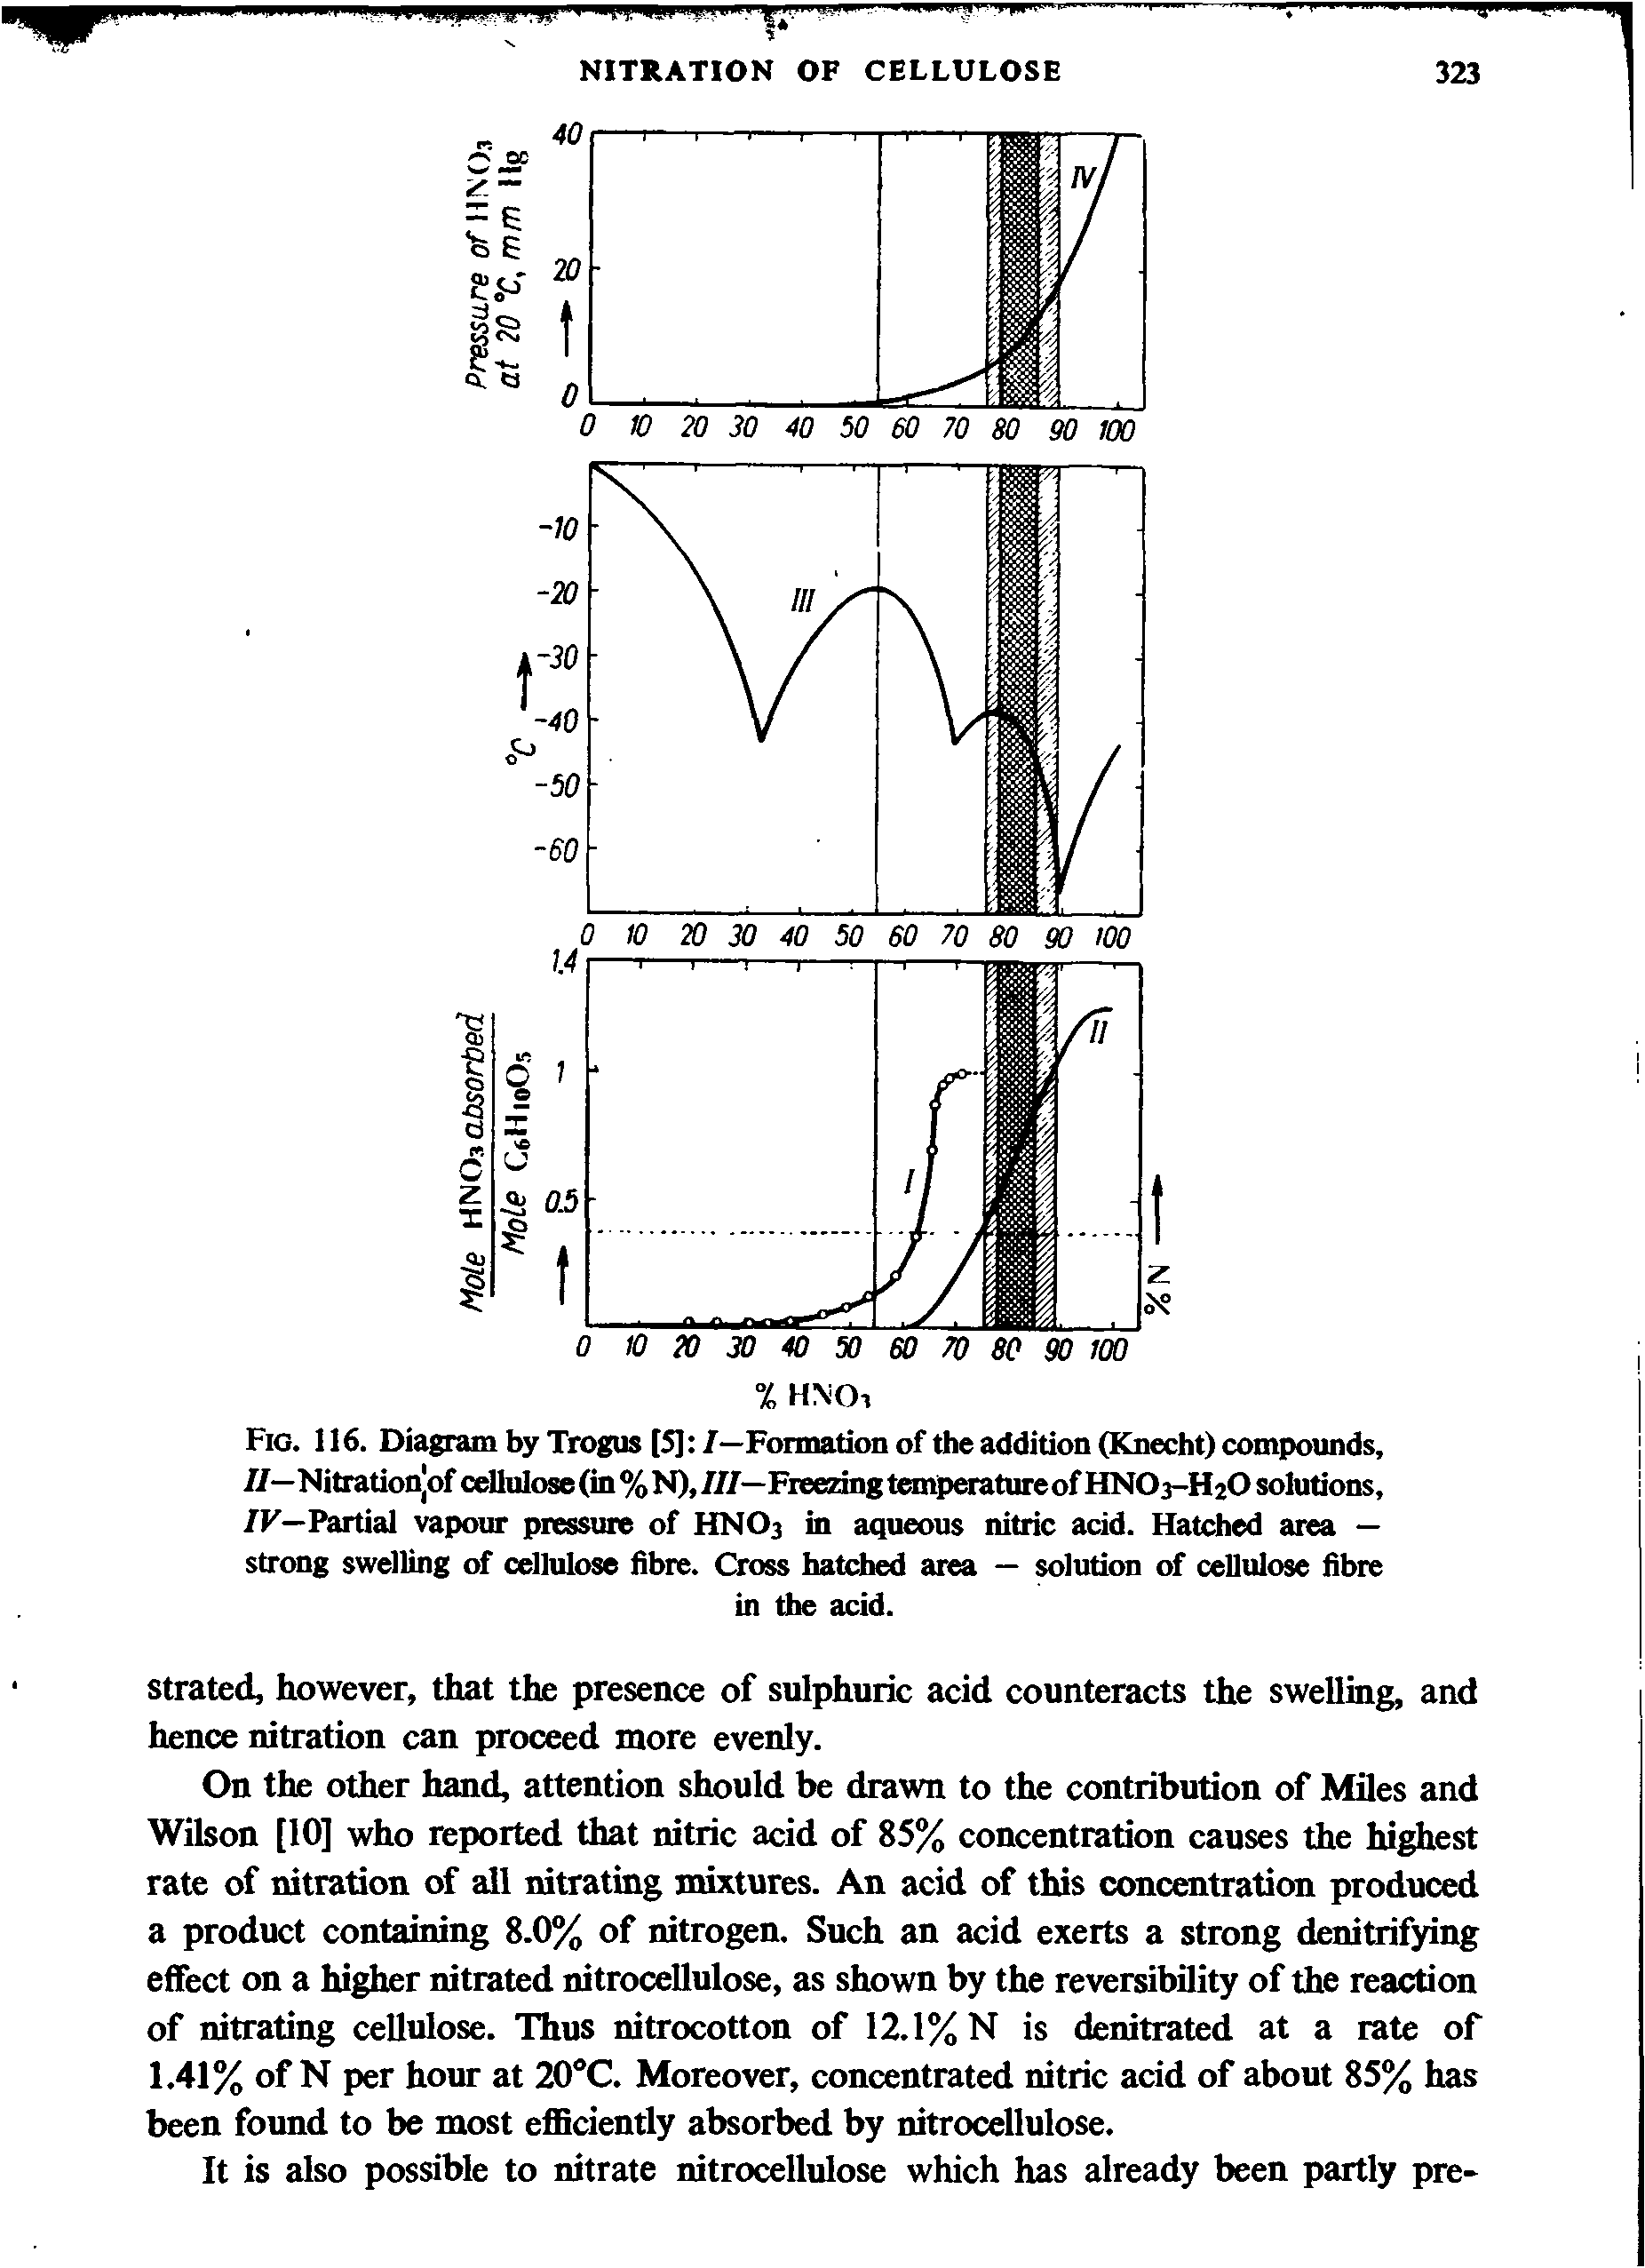 Fig. 116. Diagram by Trogus [5] /—Formation of the addition (Knecht) compounds, //—Nitrationjof cellulose (in % N), ///—Freezing temperatureof HNO3-H2O solutions, IV— Partial vapour pressure of HNO3 in aqueous nitric acid. Hatched area — strong swelling of cellulose fibre. Cross hatched area — solution of cellulose fibre...